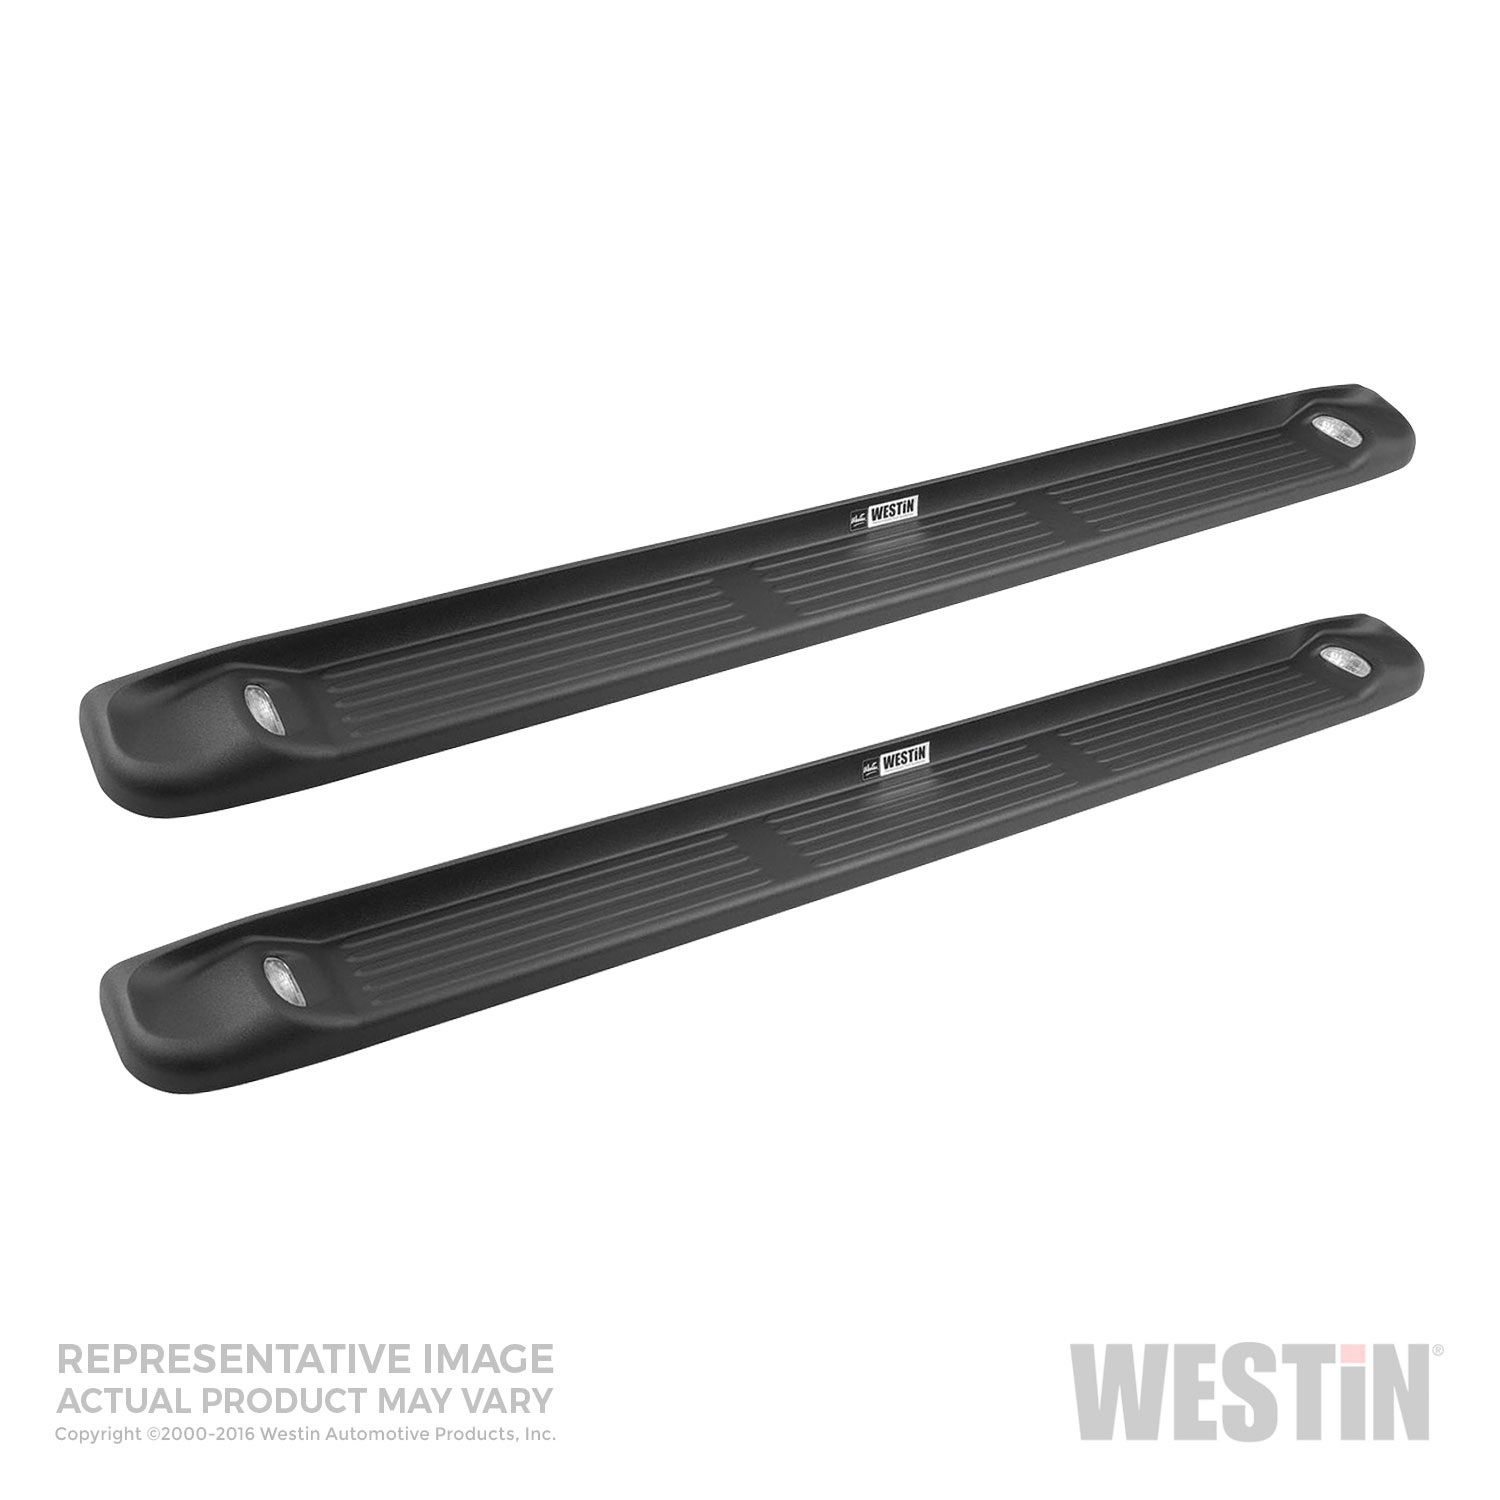 Westin Molded Running Boards, Lighted, 72 In. Board, Black Molded Plastic, Does Not Include Mount